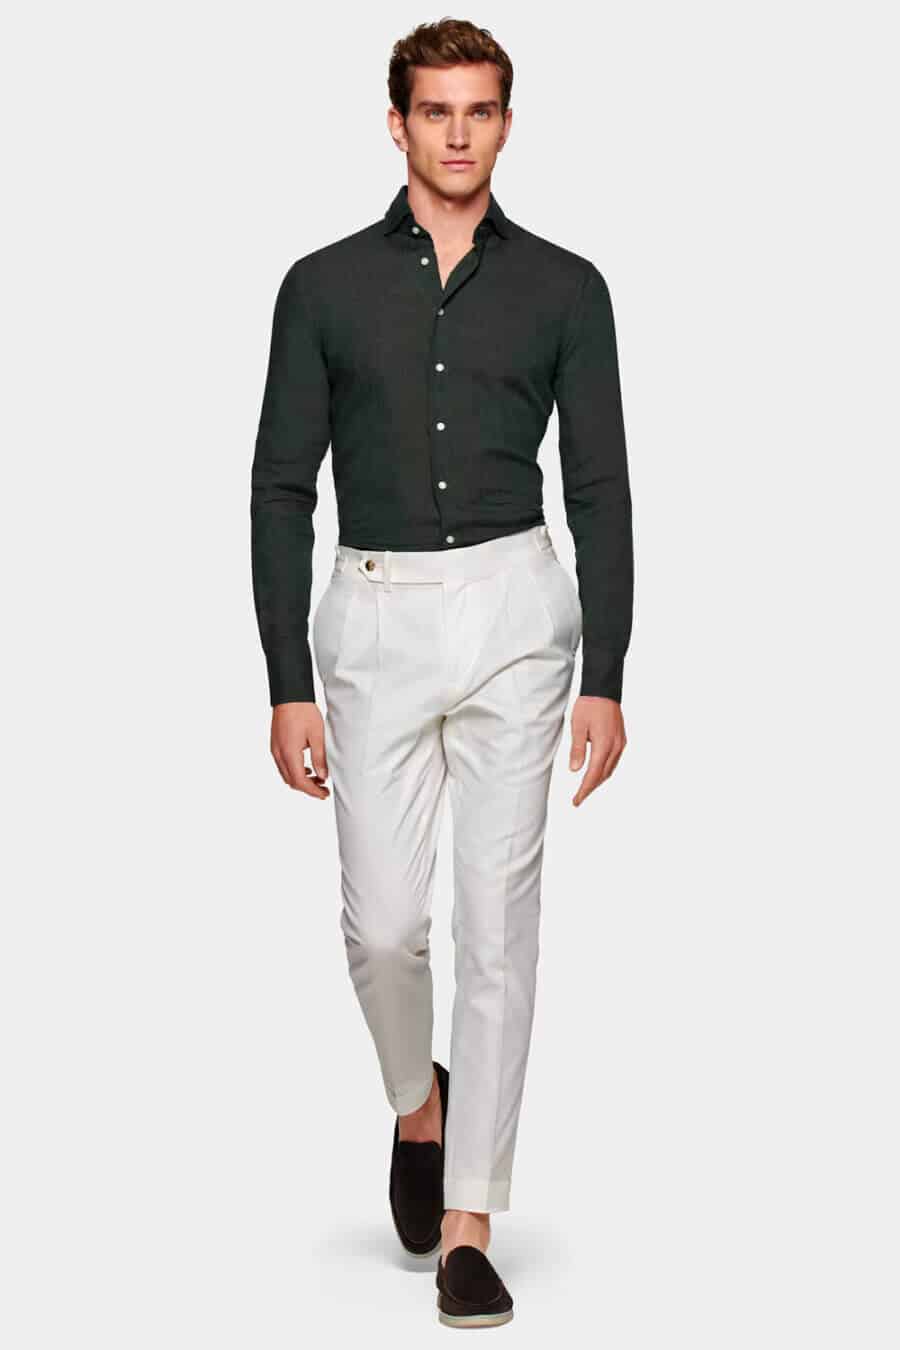 Men's smart linen shirt with trousers and loafers business casual outfit